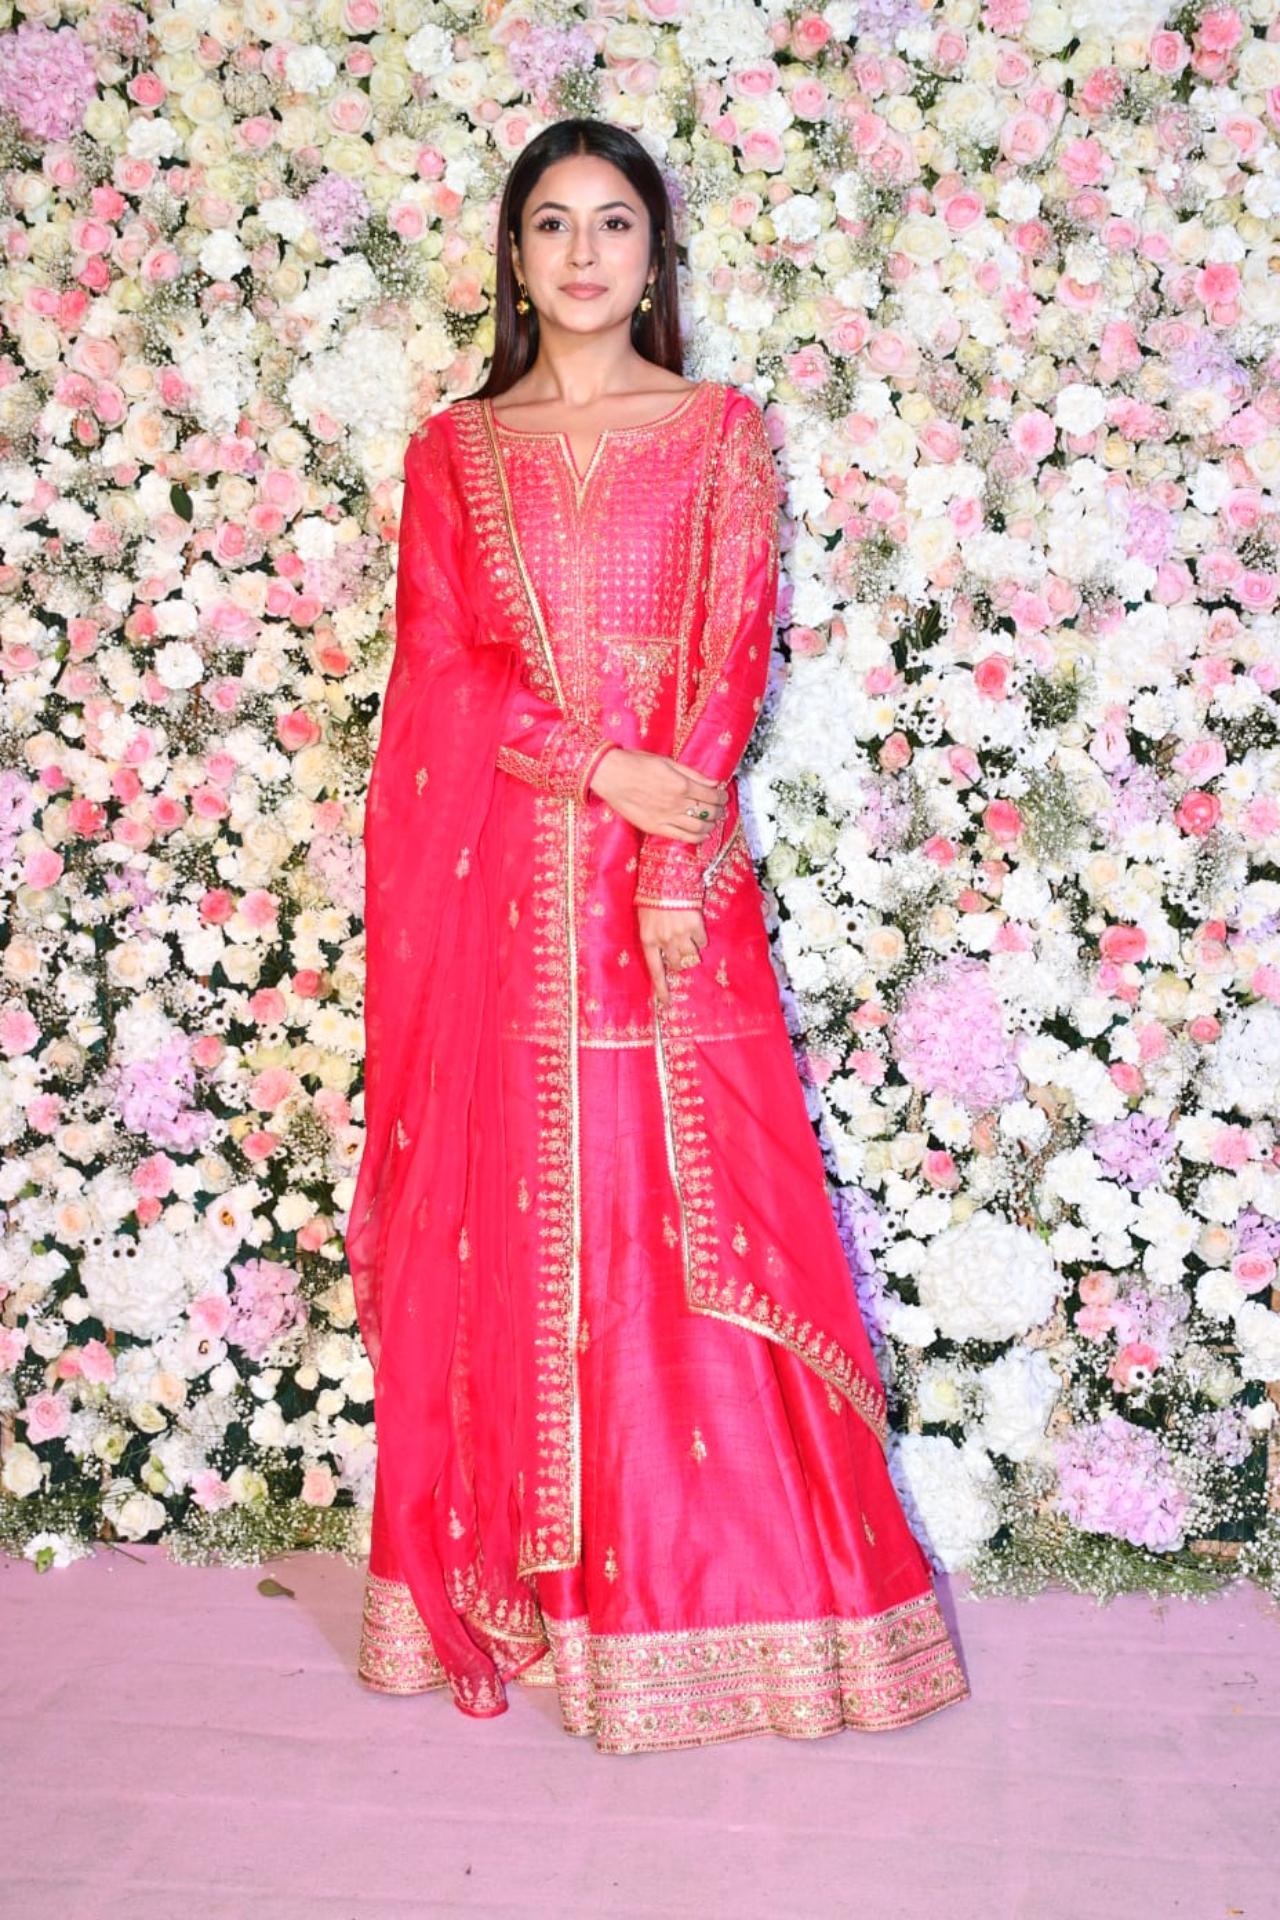 Shenaaz Gill who recently made her Hindi film debut with 'Kisi Ka Bhai Kisi Ki Jaan' sparkled in a pink Indian attire for the Eid bash